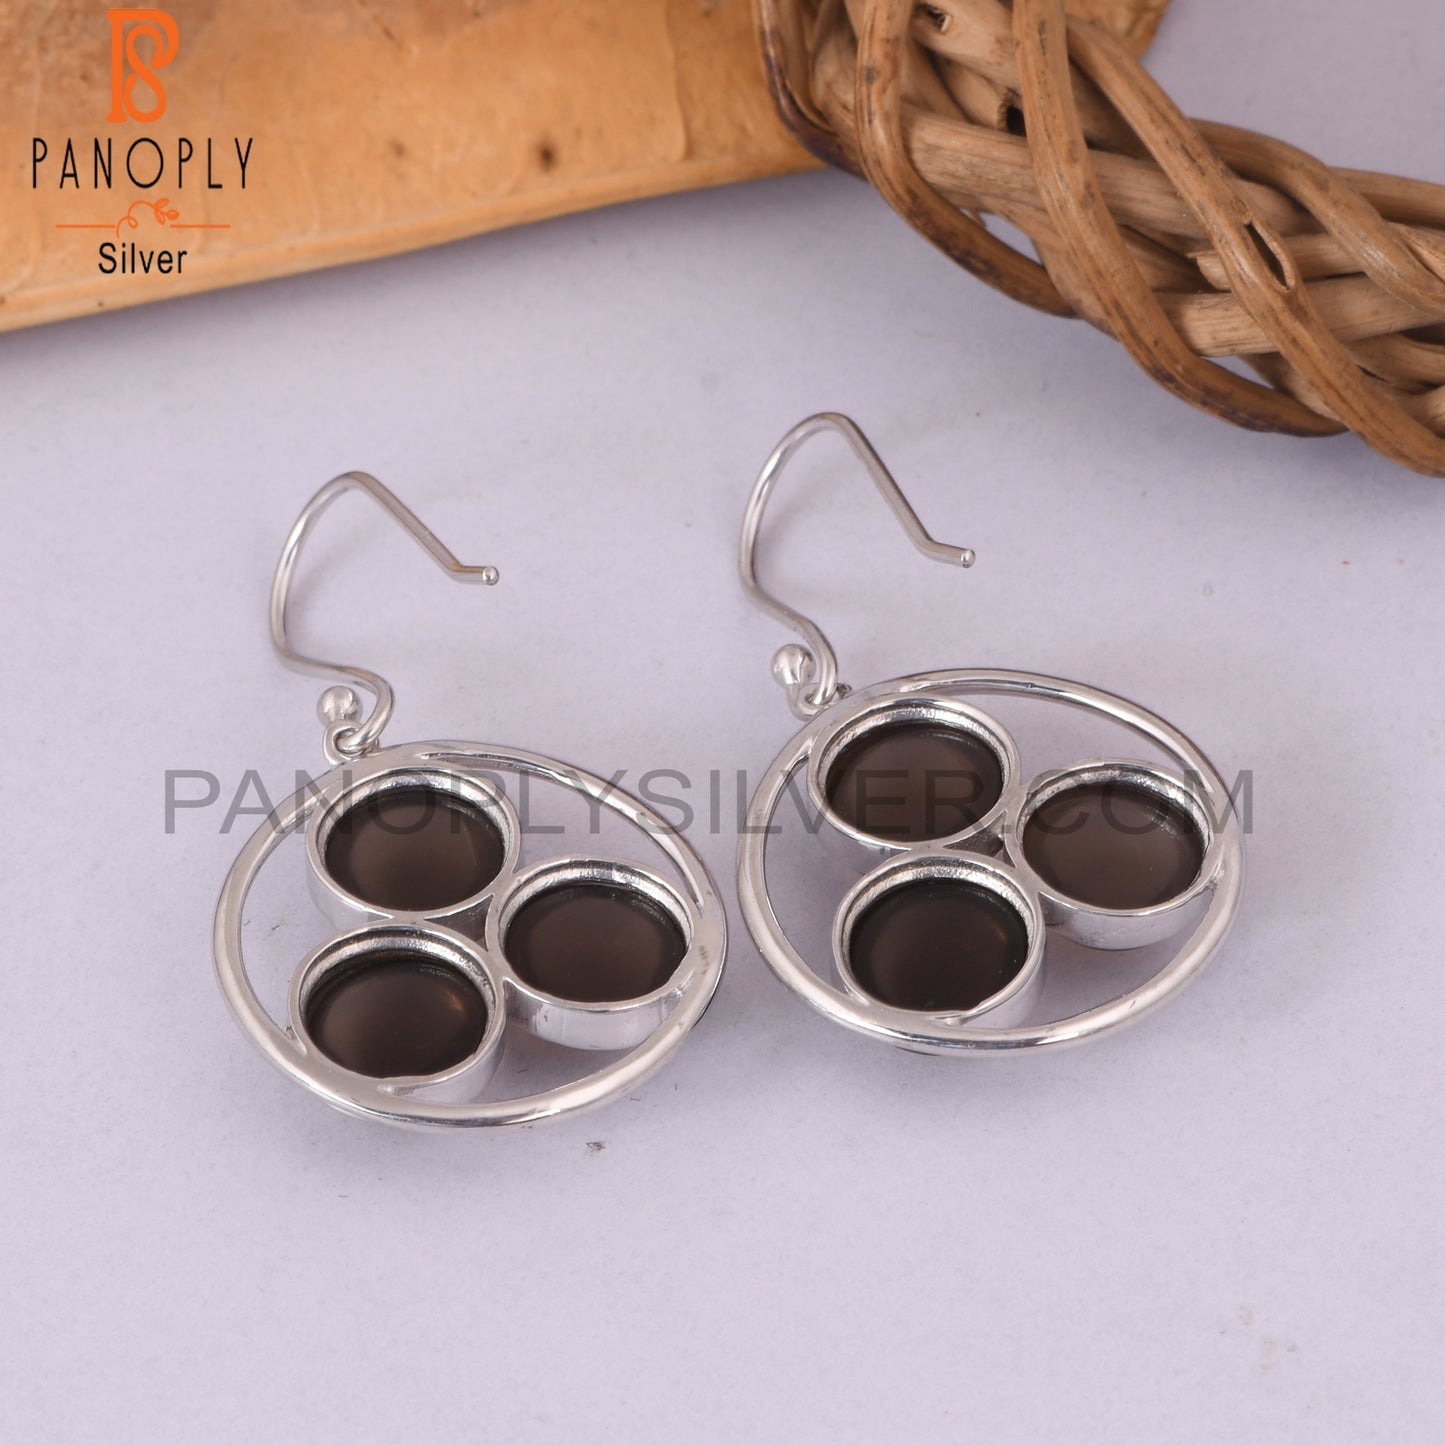 Solid 925 Sterling Silver Smoky Quartz Stone Earrings